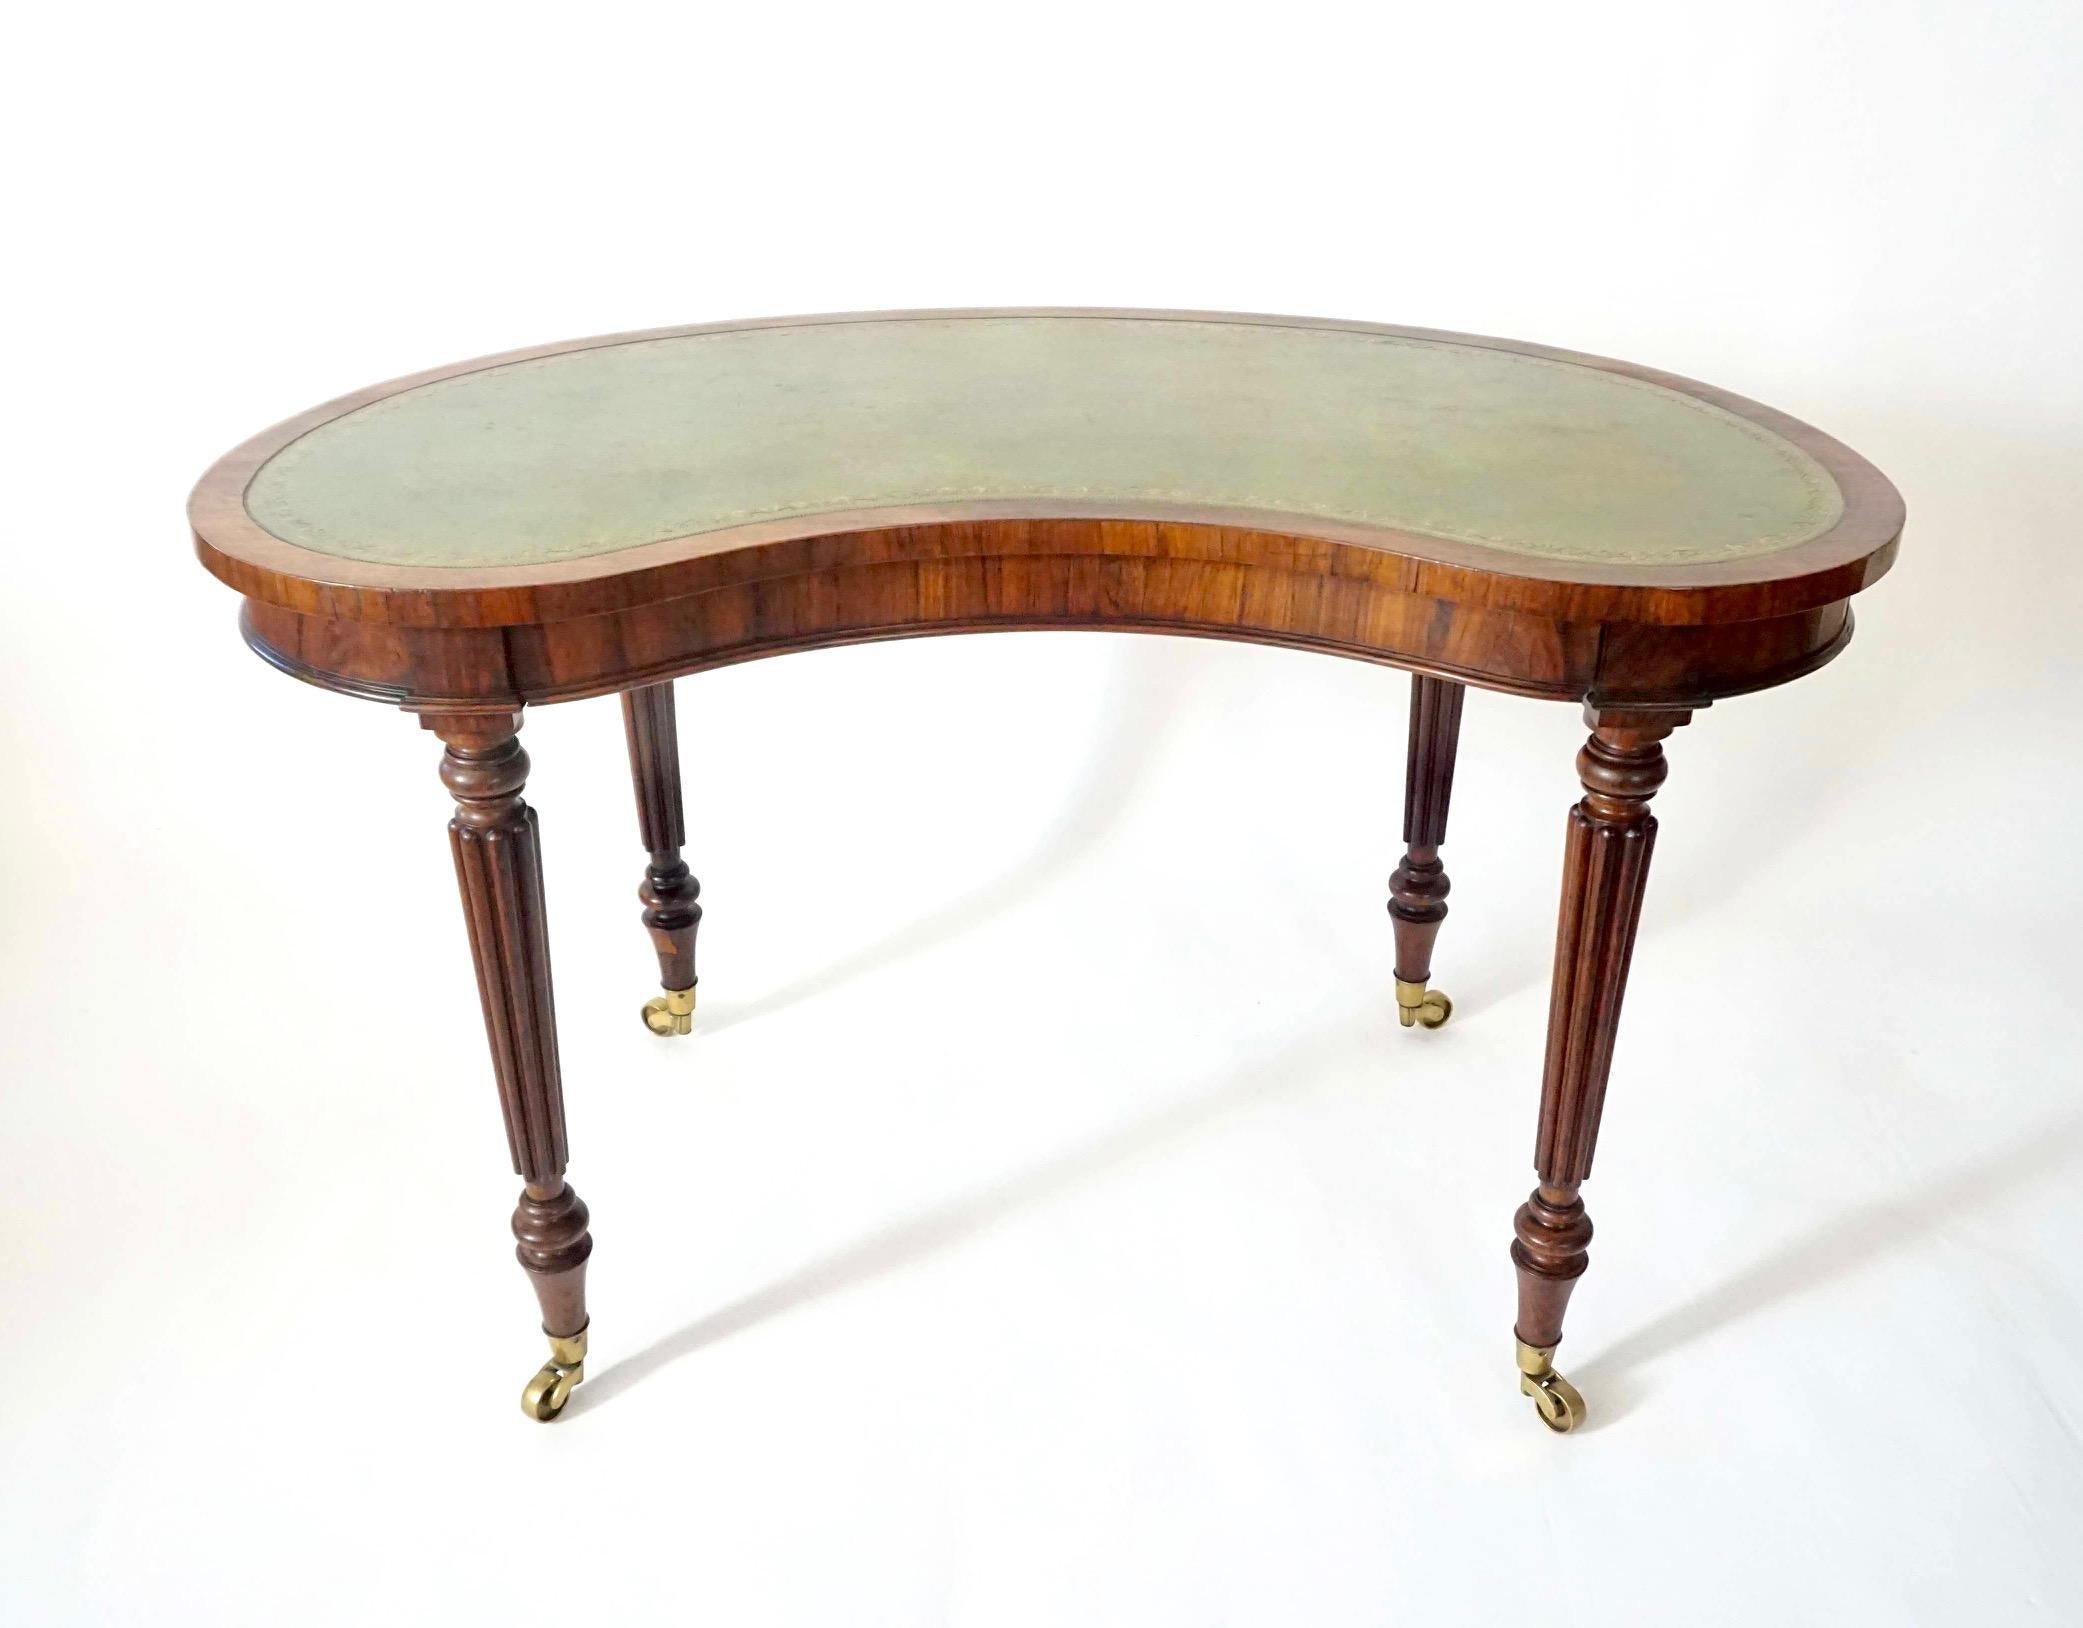 An elegant and rare circa 1815 English regency period rosewood writing table of 'kidney' form by legendary English cabinetmaking firm Gillows of Lancaster and London, the shaped top having possibly original gilt-tooled green leather inset writing